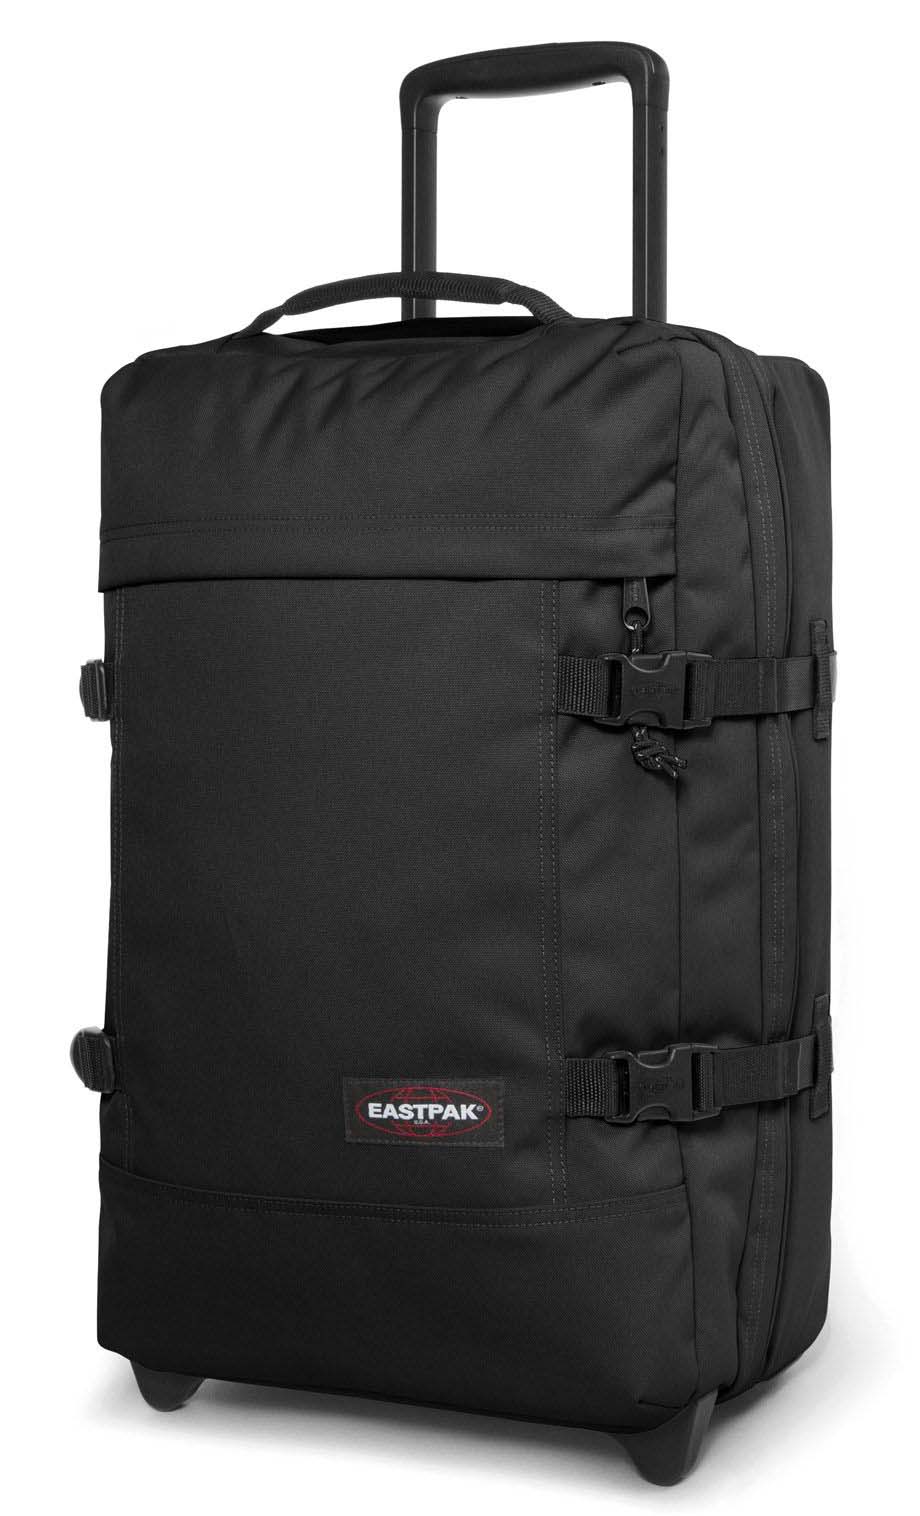 Eastpak Strapverz S Wheeled Bag/Suitcase | Absolute-Snow